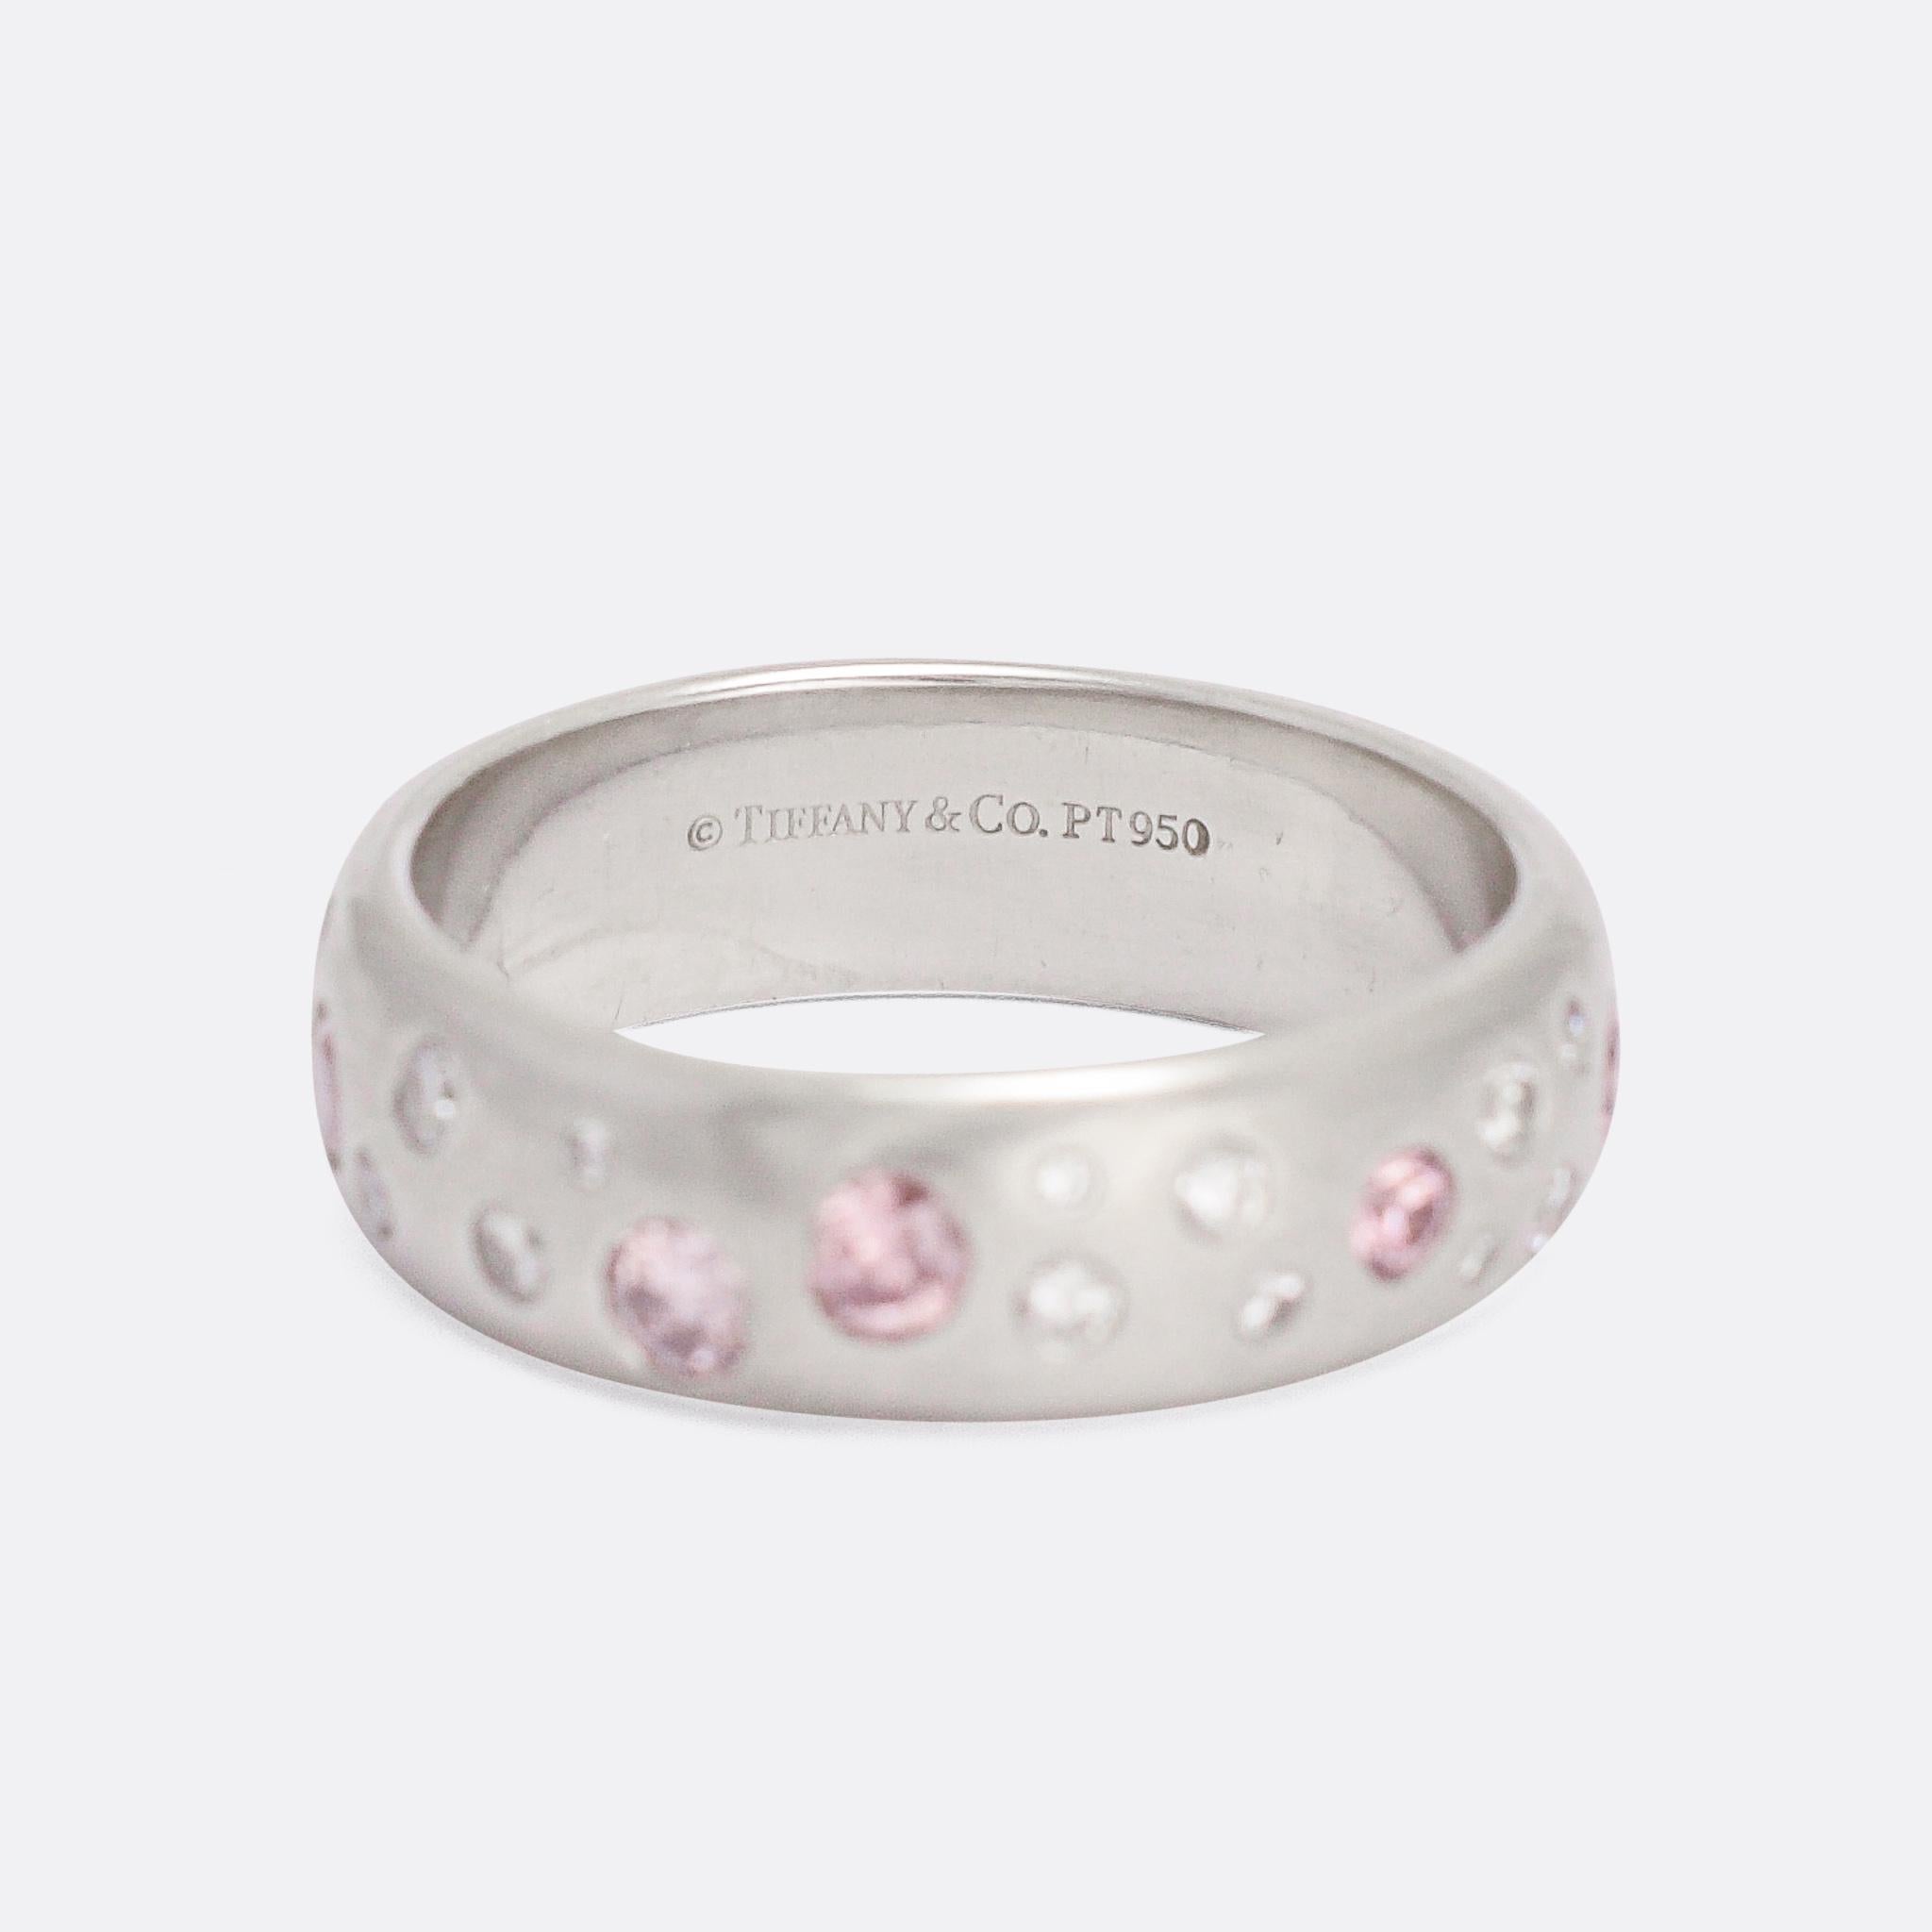 An attractive pink and white diamond band by Tiffany & Co. There's not much age to it, it dates from around the turn of this century, but it's particularly well made - crafted in platinum throughout with a good substantial feel. Set with diamonds of